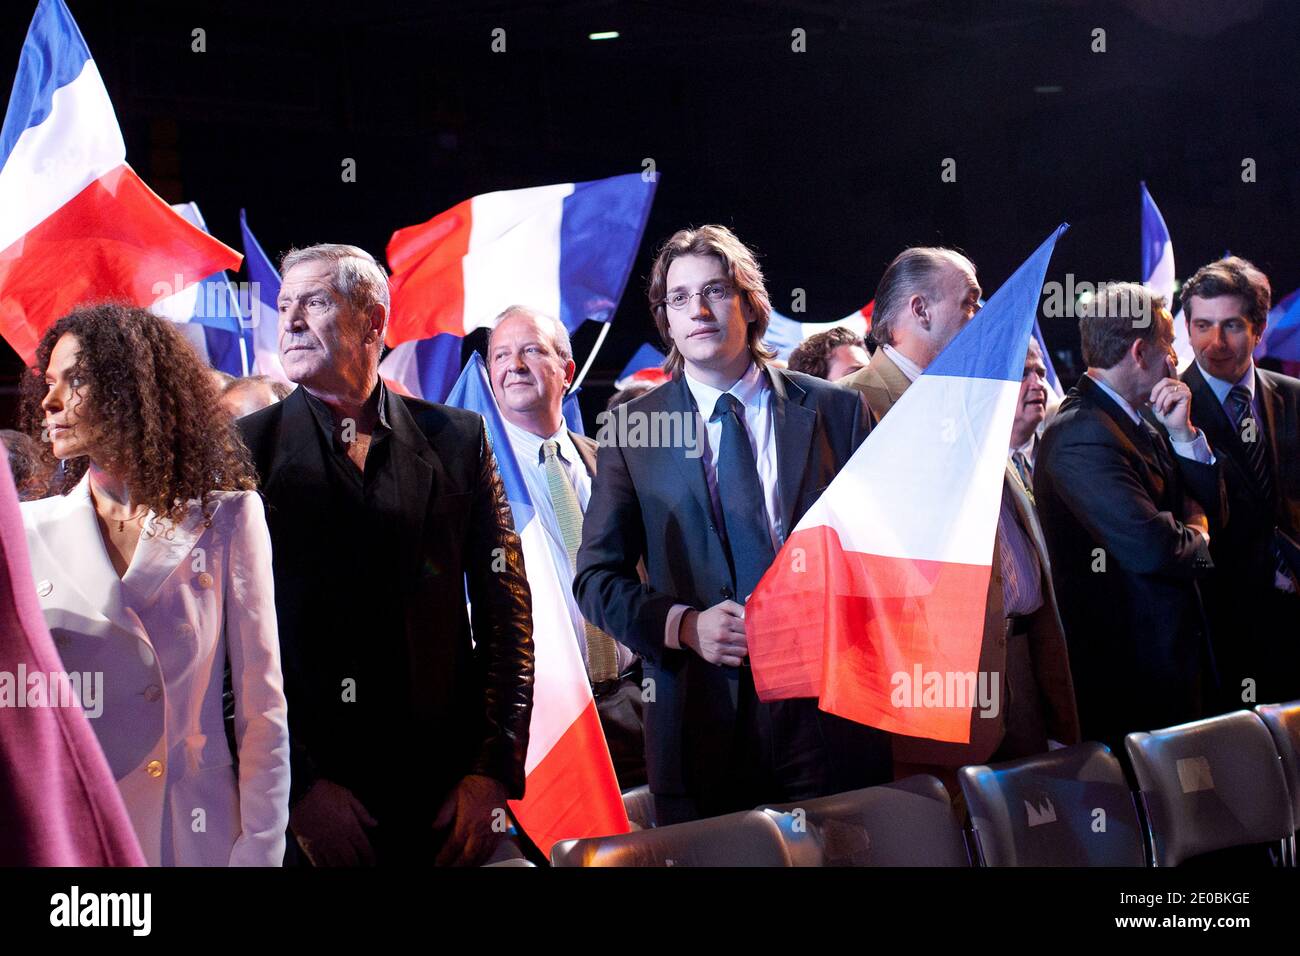 Gerard Darmon and Jean Sarkozy attend a meeting to support French incumbent President and UMP ruling candidate for 2012 presidential election Nicolas Sarkozy, in Levallois-Perret, suburbs of Paris, France, on March 28, 2012.. Photo by Stephane Lemouton/ABACAPRESS.COM. Stock Photo